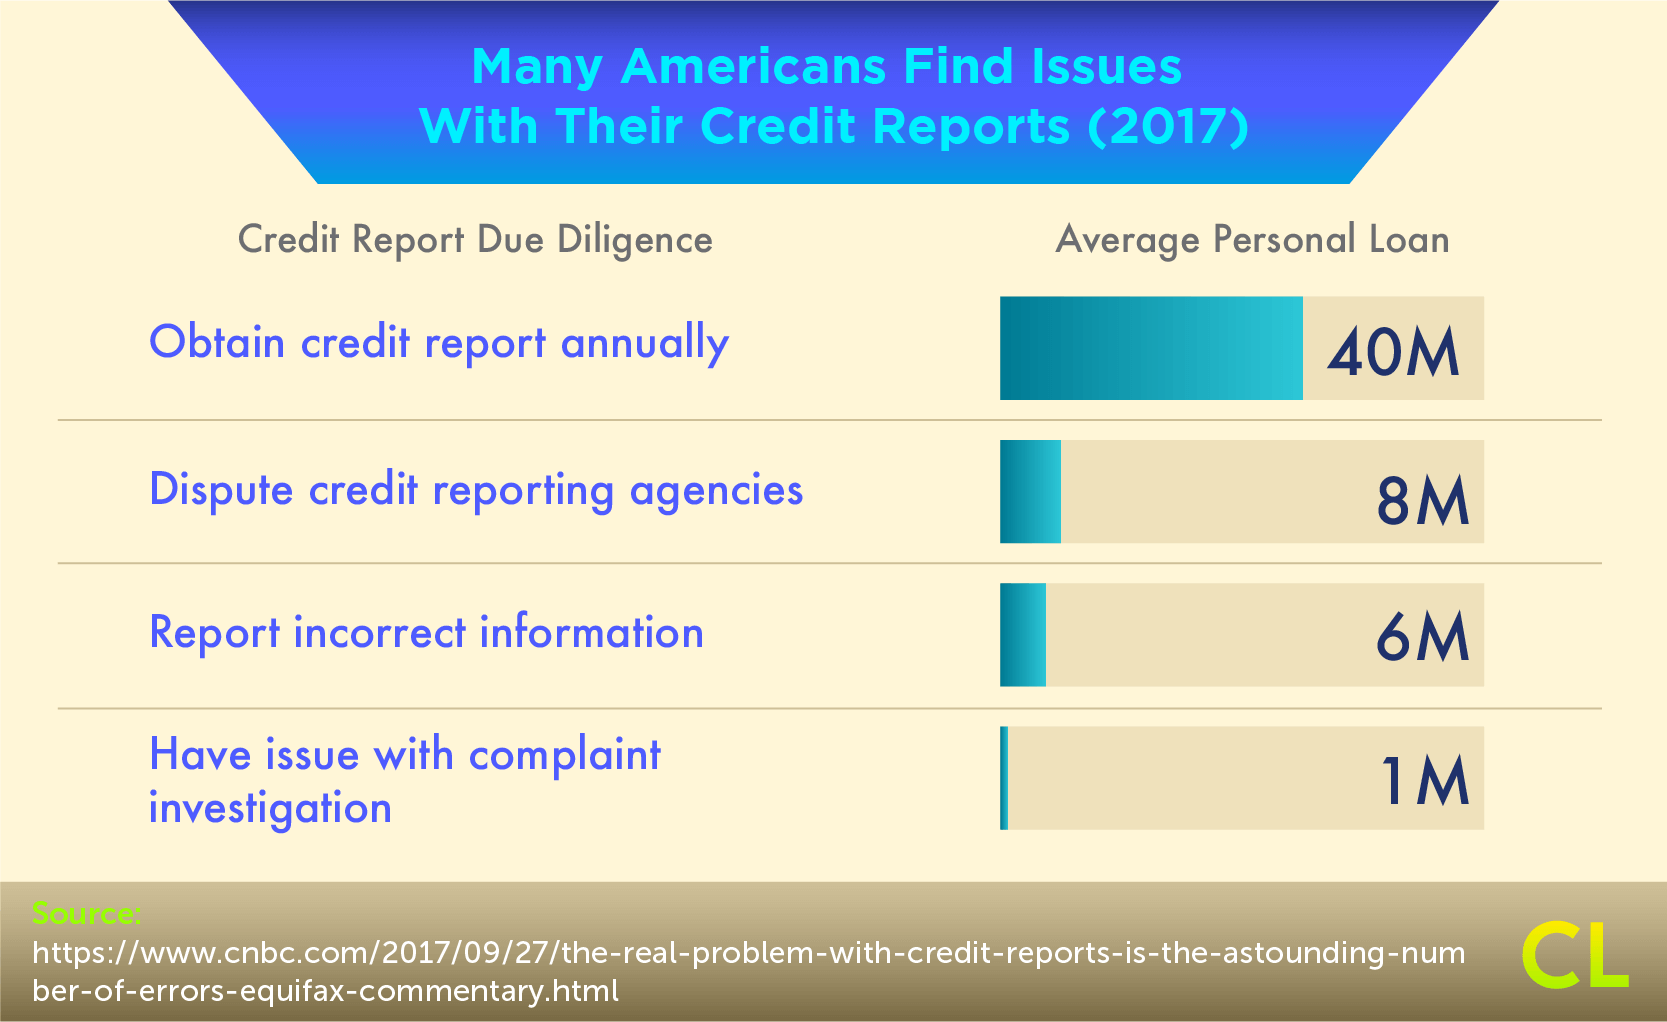 Many Americans Find Issues With Their Credit Reports